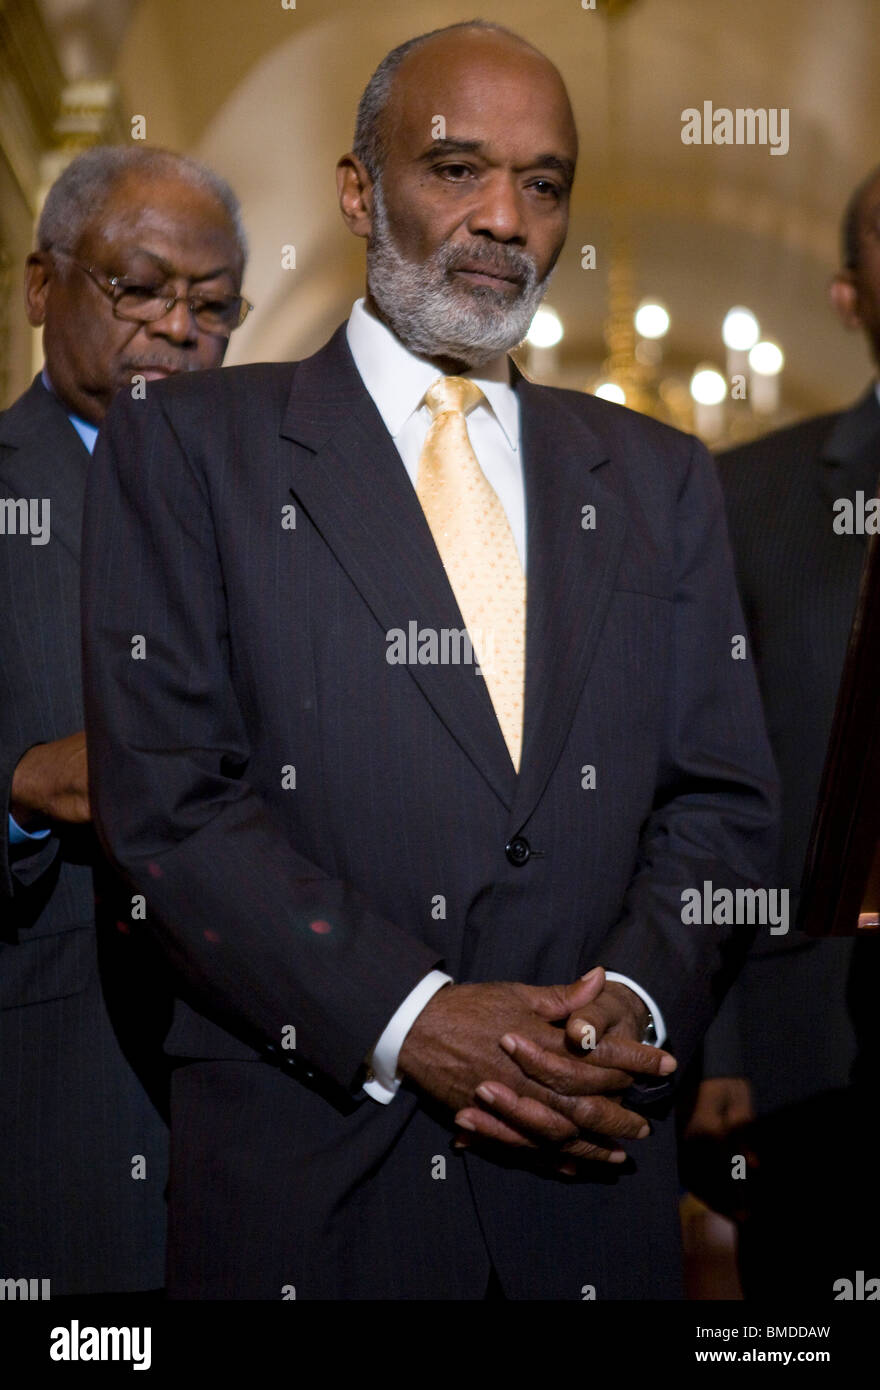 The president of haiti hi-res stock photography and images - Alamy